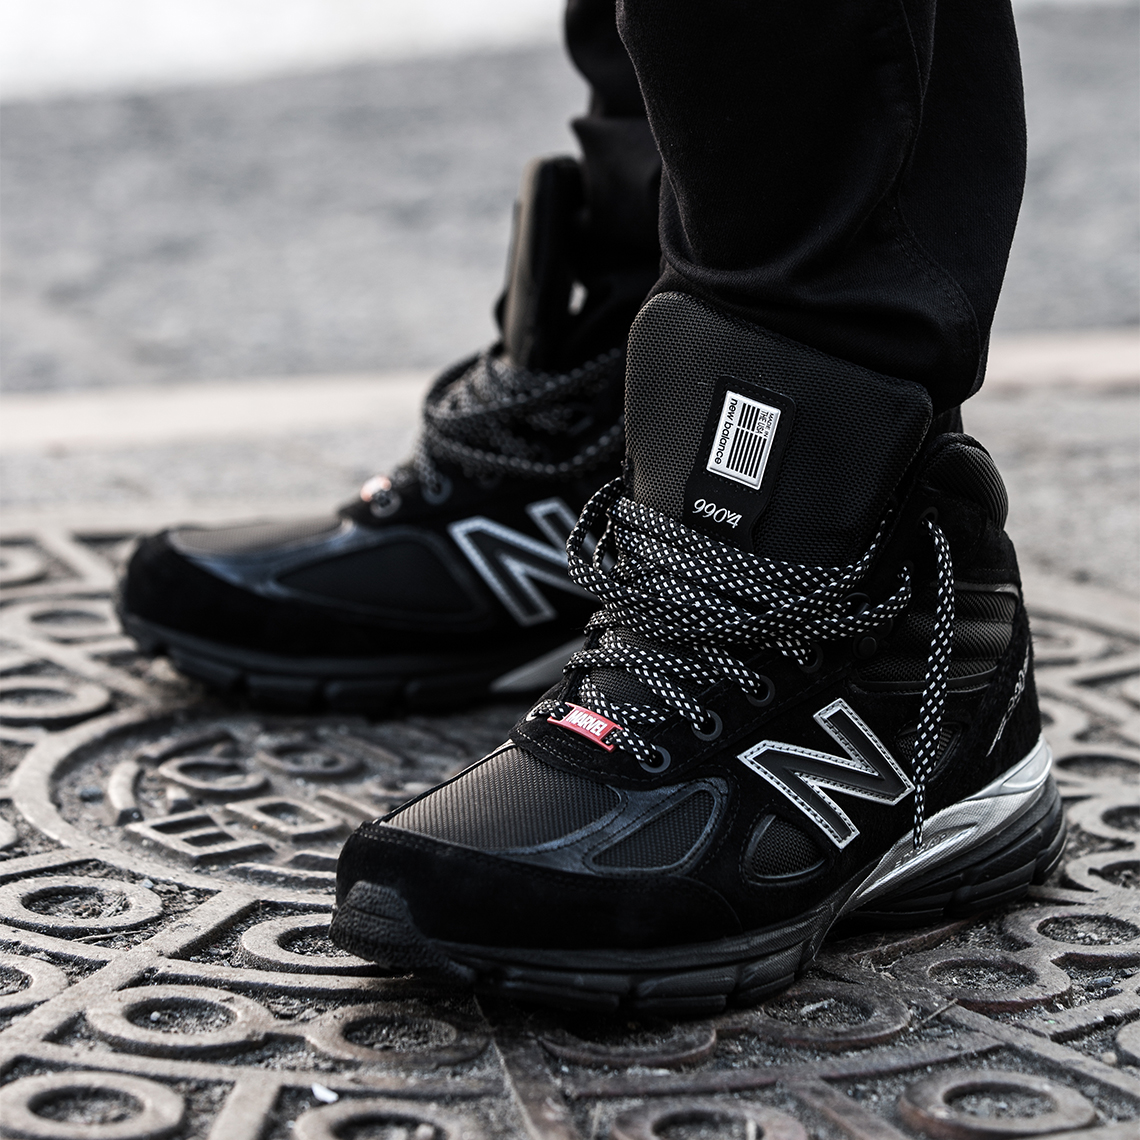 Marvel Black Panther New Balance Release Info 11